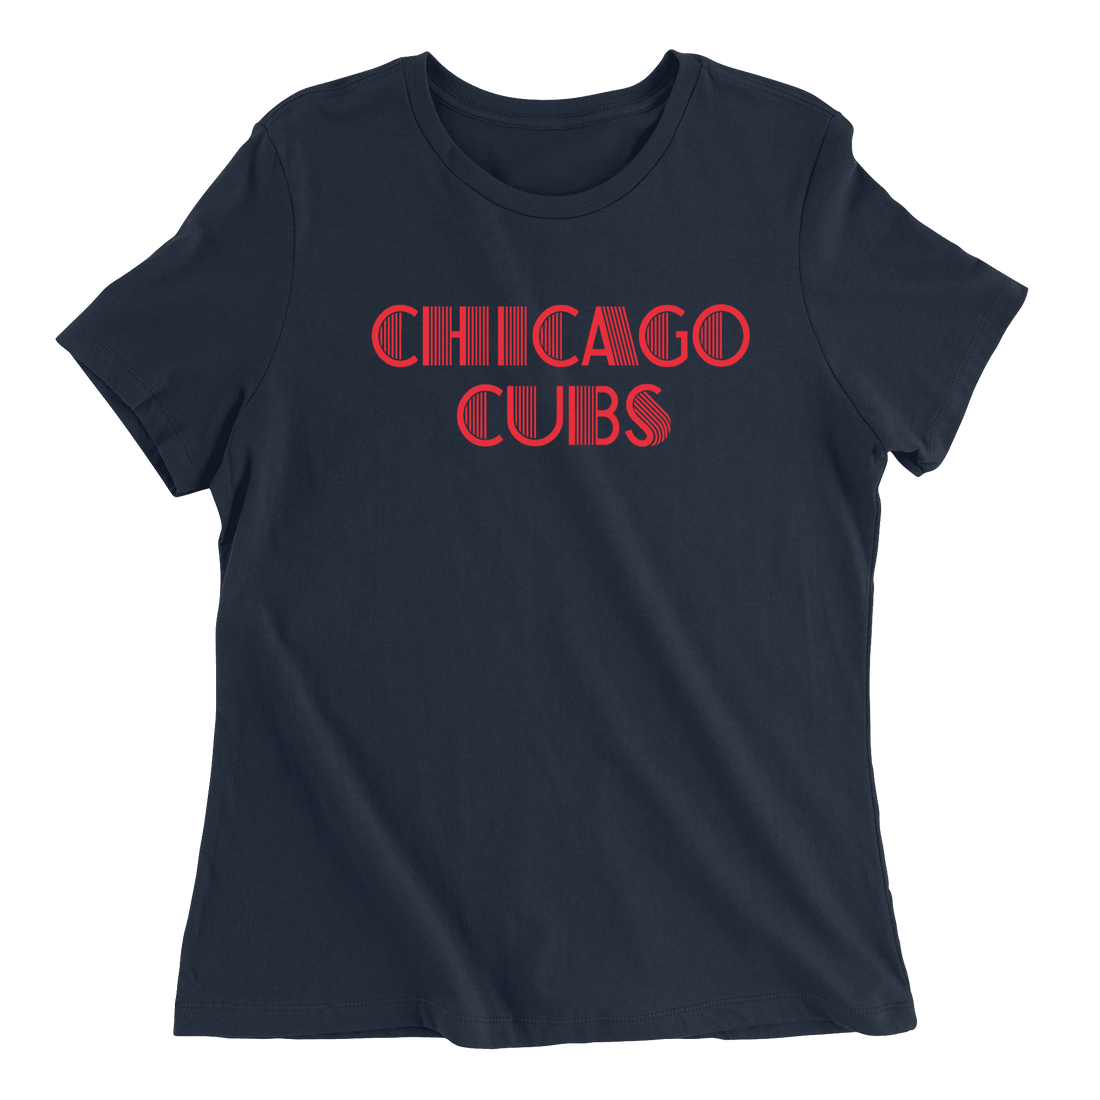 Chicago Cubs - The T-Shirt Deli, Co.